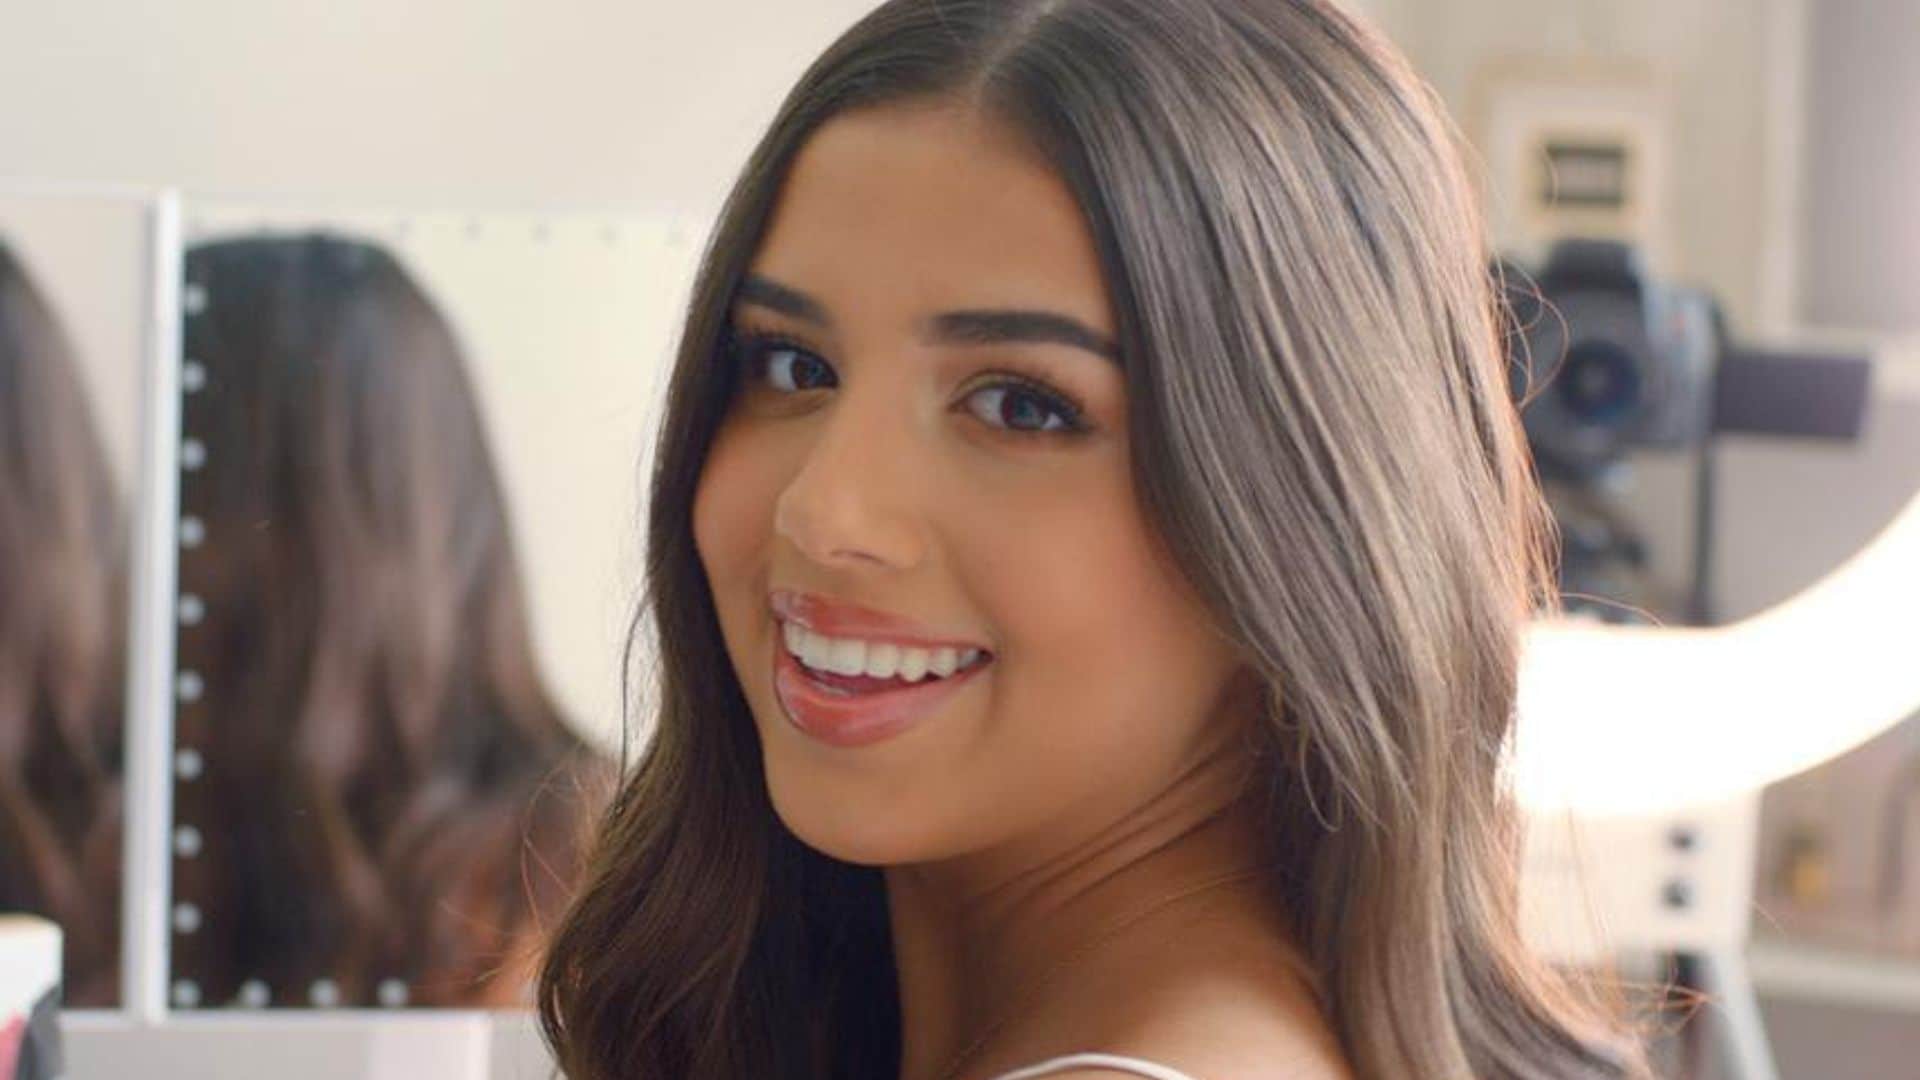 Beauty Influencer Amanda Diaz Shares Her Top 2 Must-Have Makeup Products